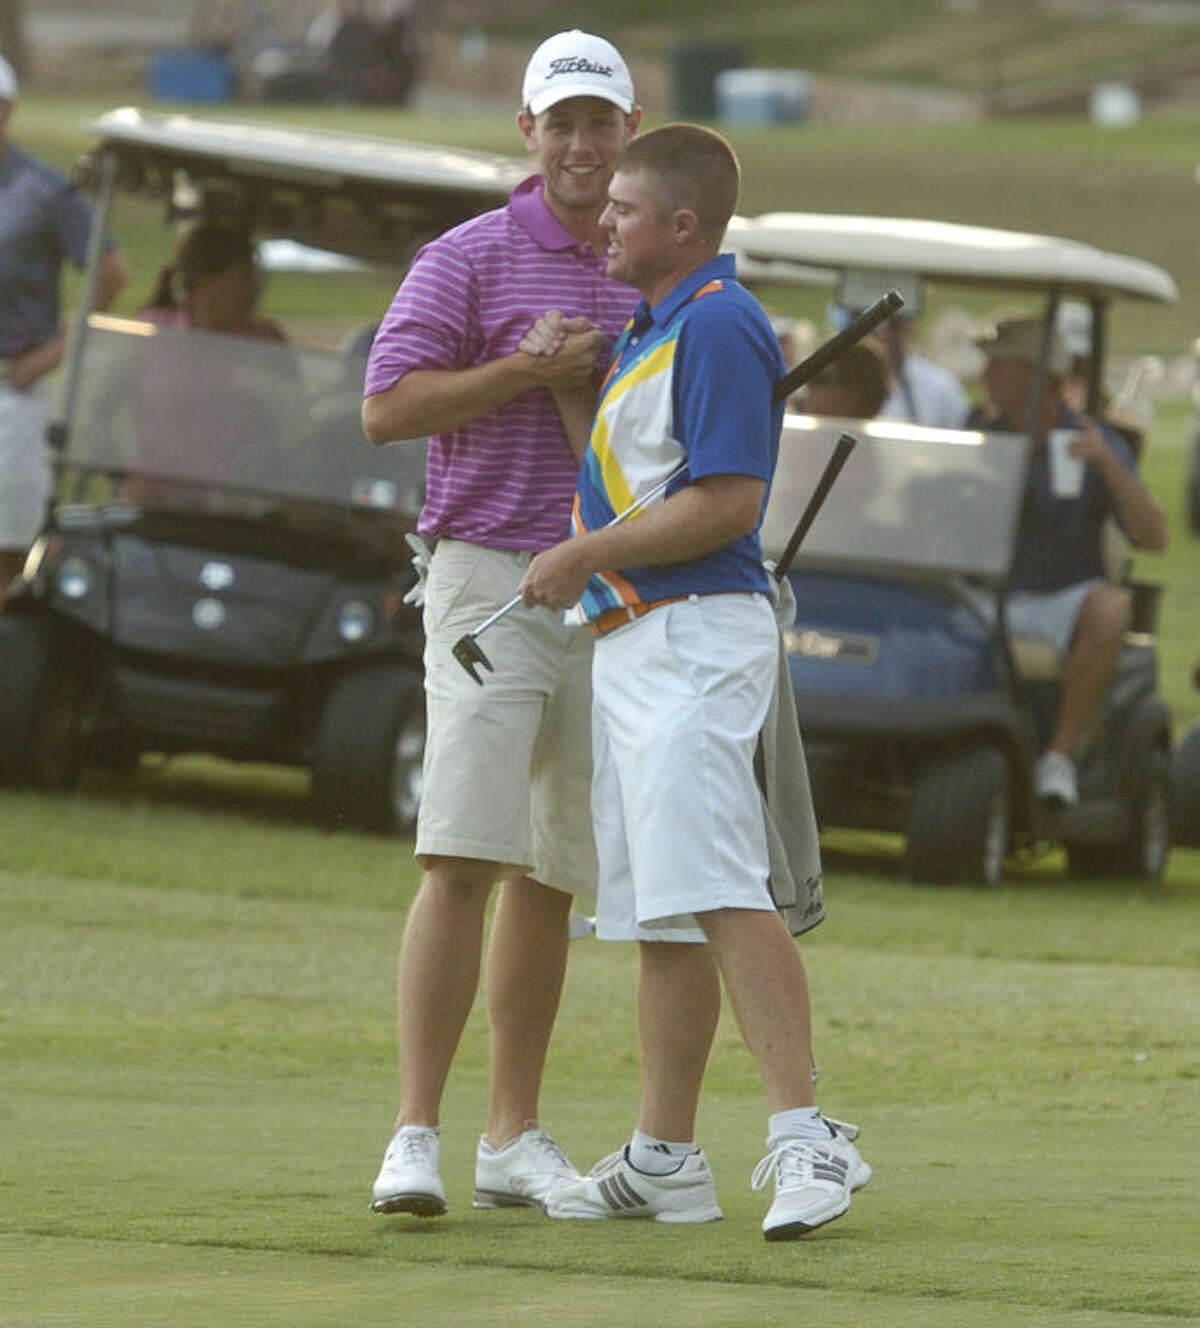 Zach Atkinson, left, is congratulated by his partner Michael Pruitt, right, after the two clinched the 2013 Jamboree championship on the 18th hole on Sunday at Green Tree Country Club. The pair shot a 59 on the final day to win by two shots over Terene Begnel and Brady Shivers. Len Hayward/Reporter-Telegram